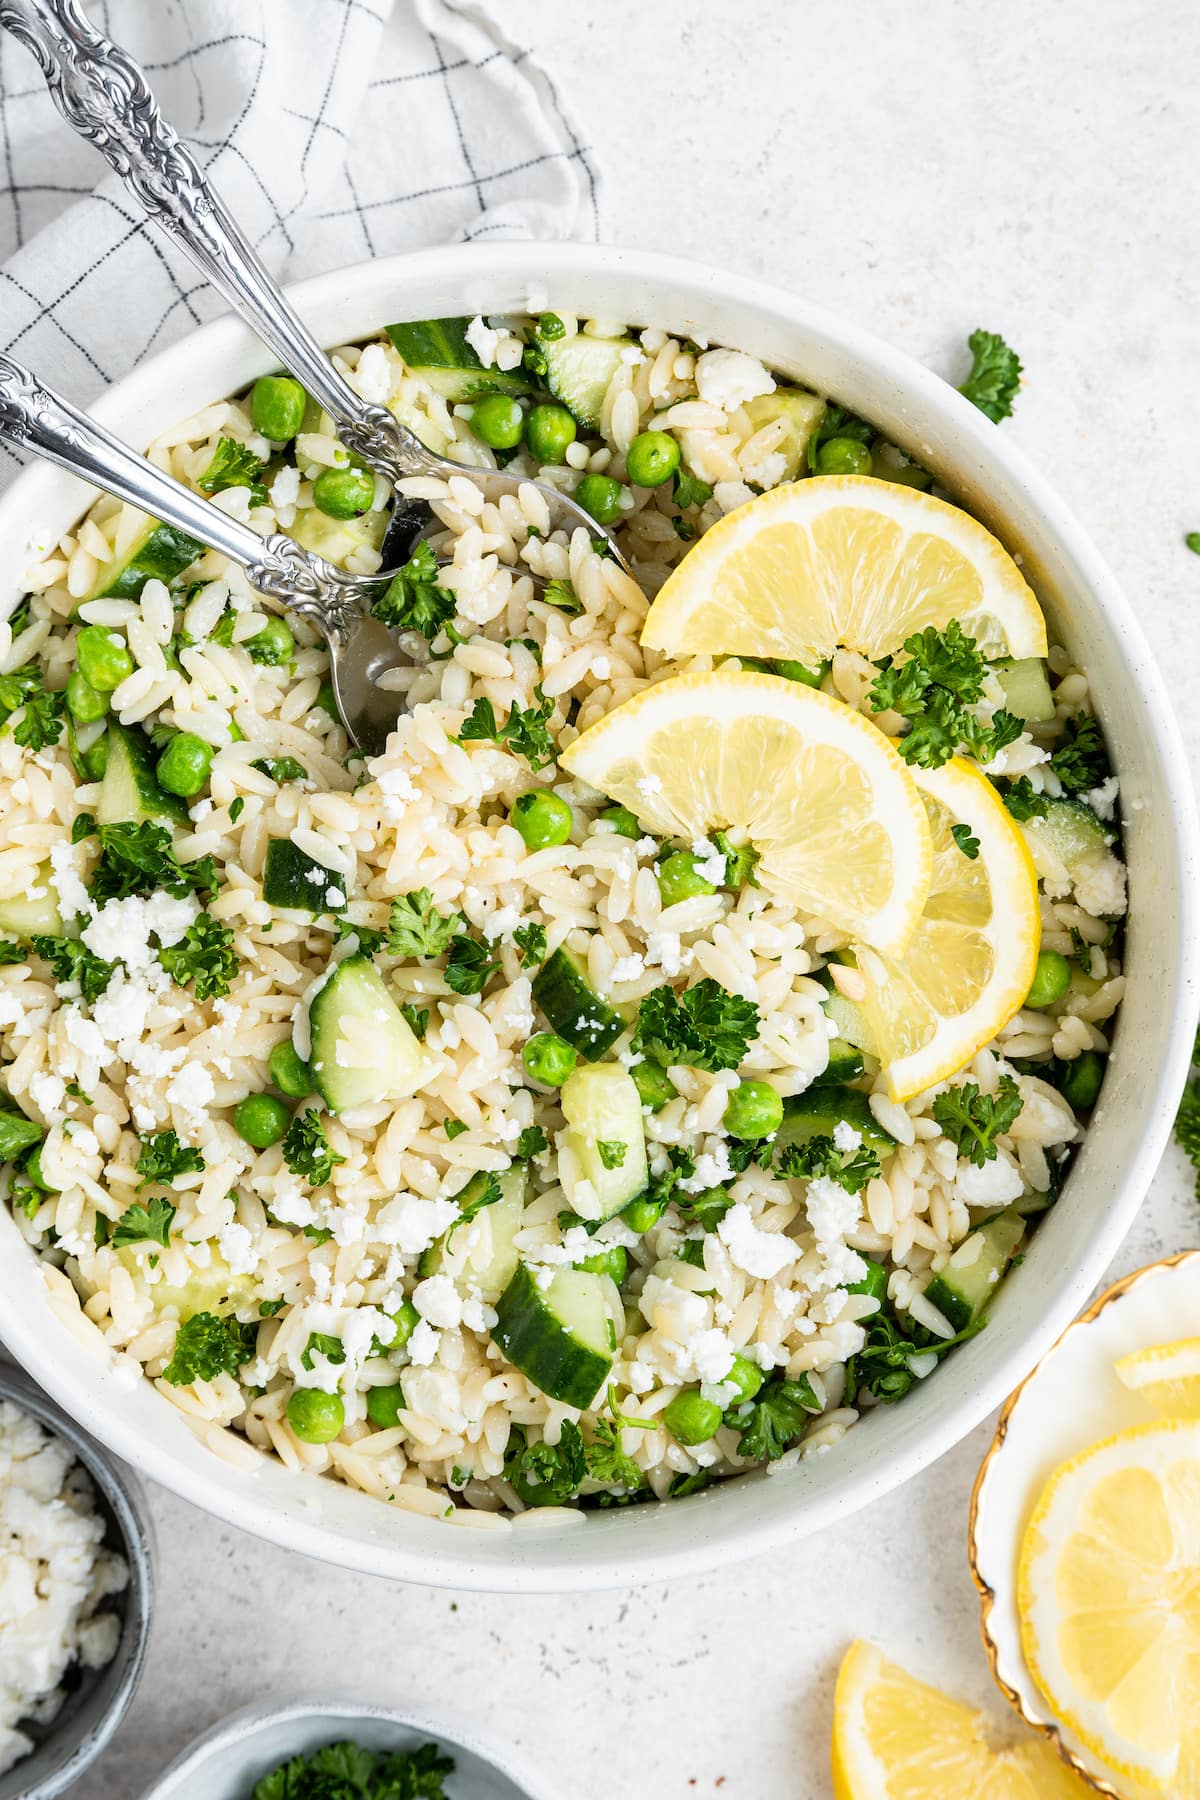 Lemon orzo salad with fresh lemon wedges in a white bowl with metal serving spoons.